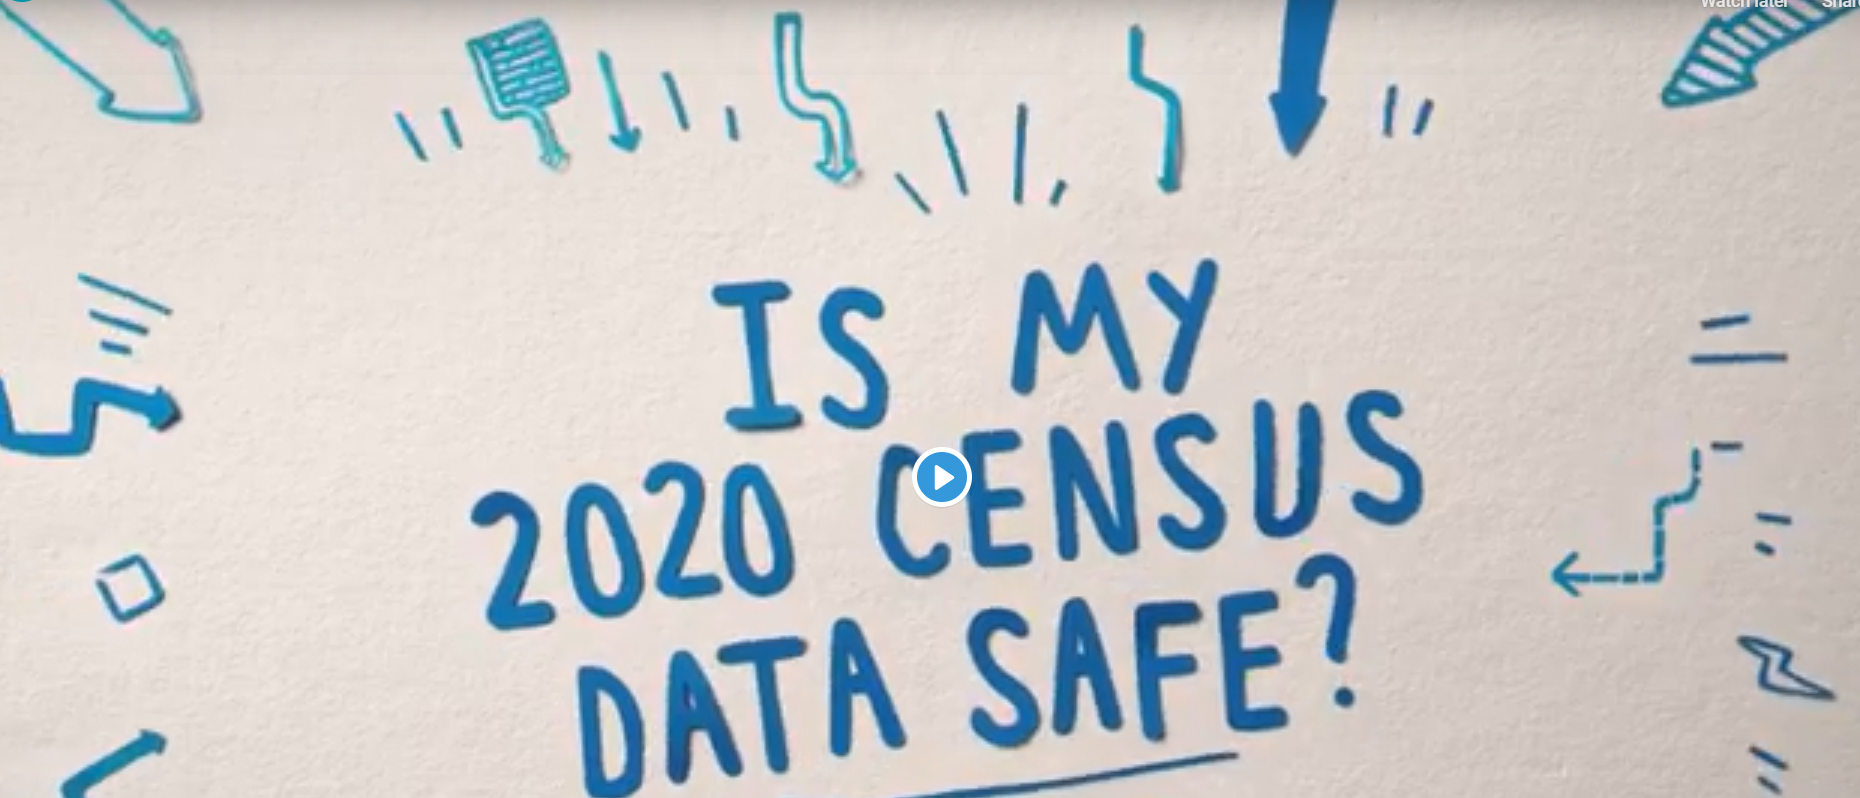 Is My 2020 Census Data Safe